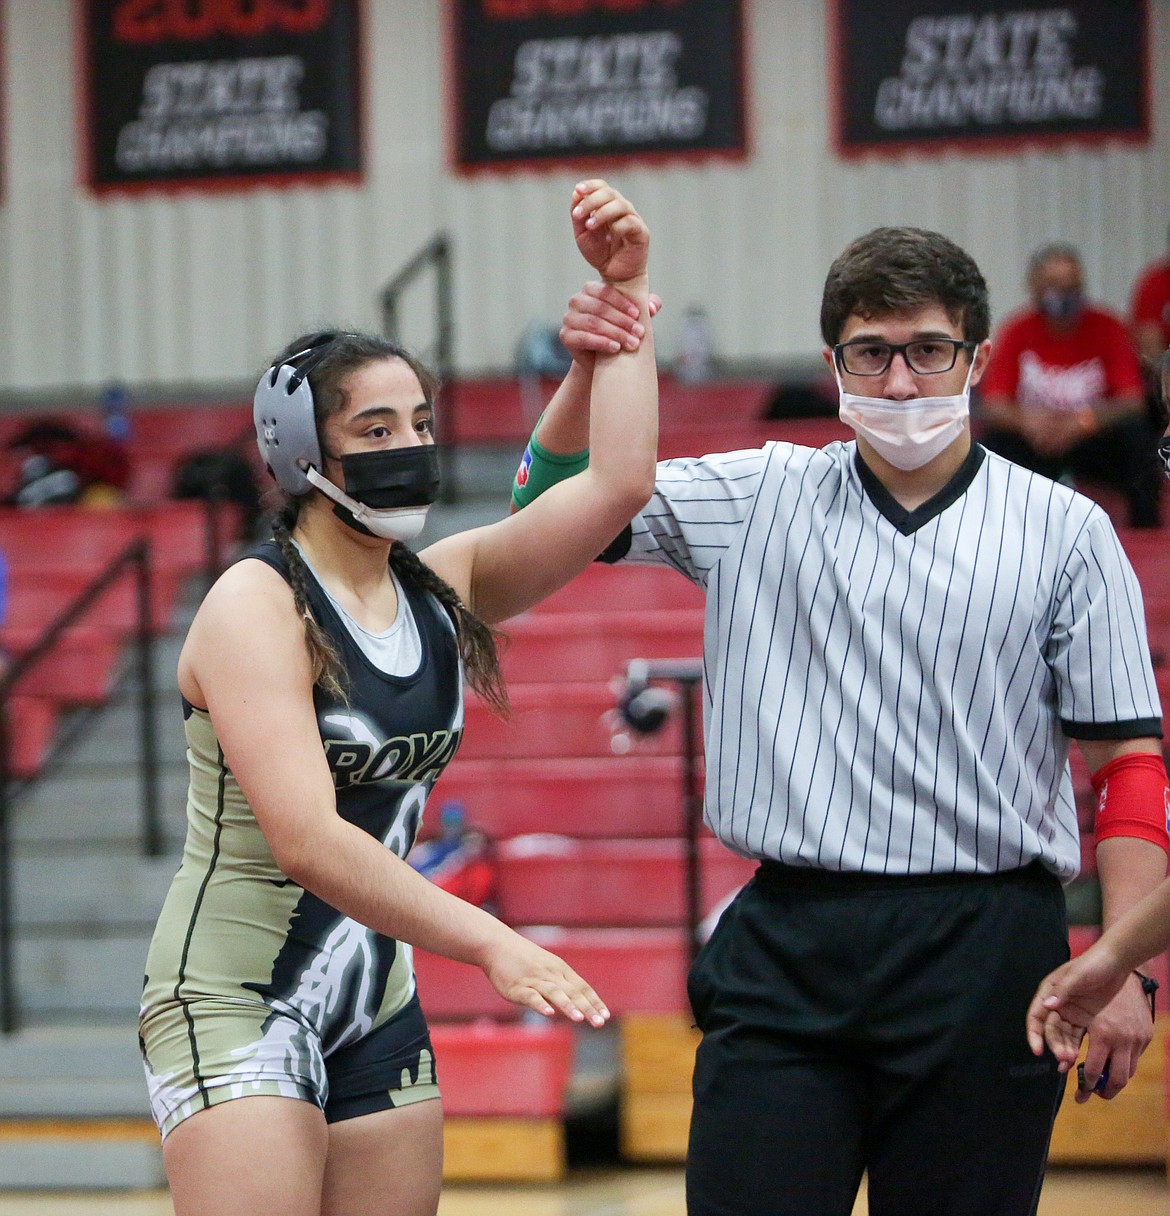 Royal High School freshman Emma Villa's hand is held up after a victory in one of the opening rounds at 145 on Thursday afternoon at the girls wrestling event at Othello High School.